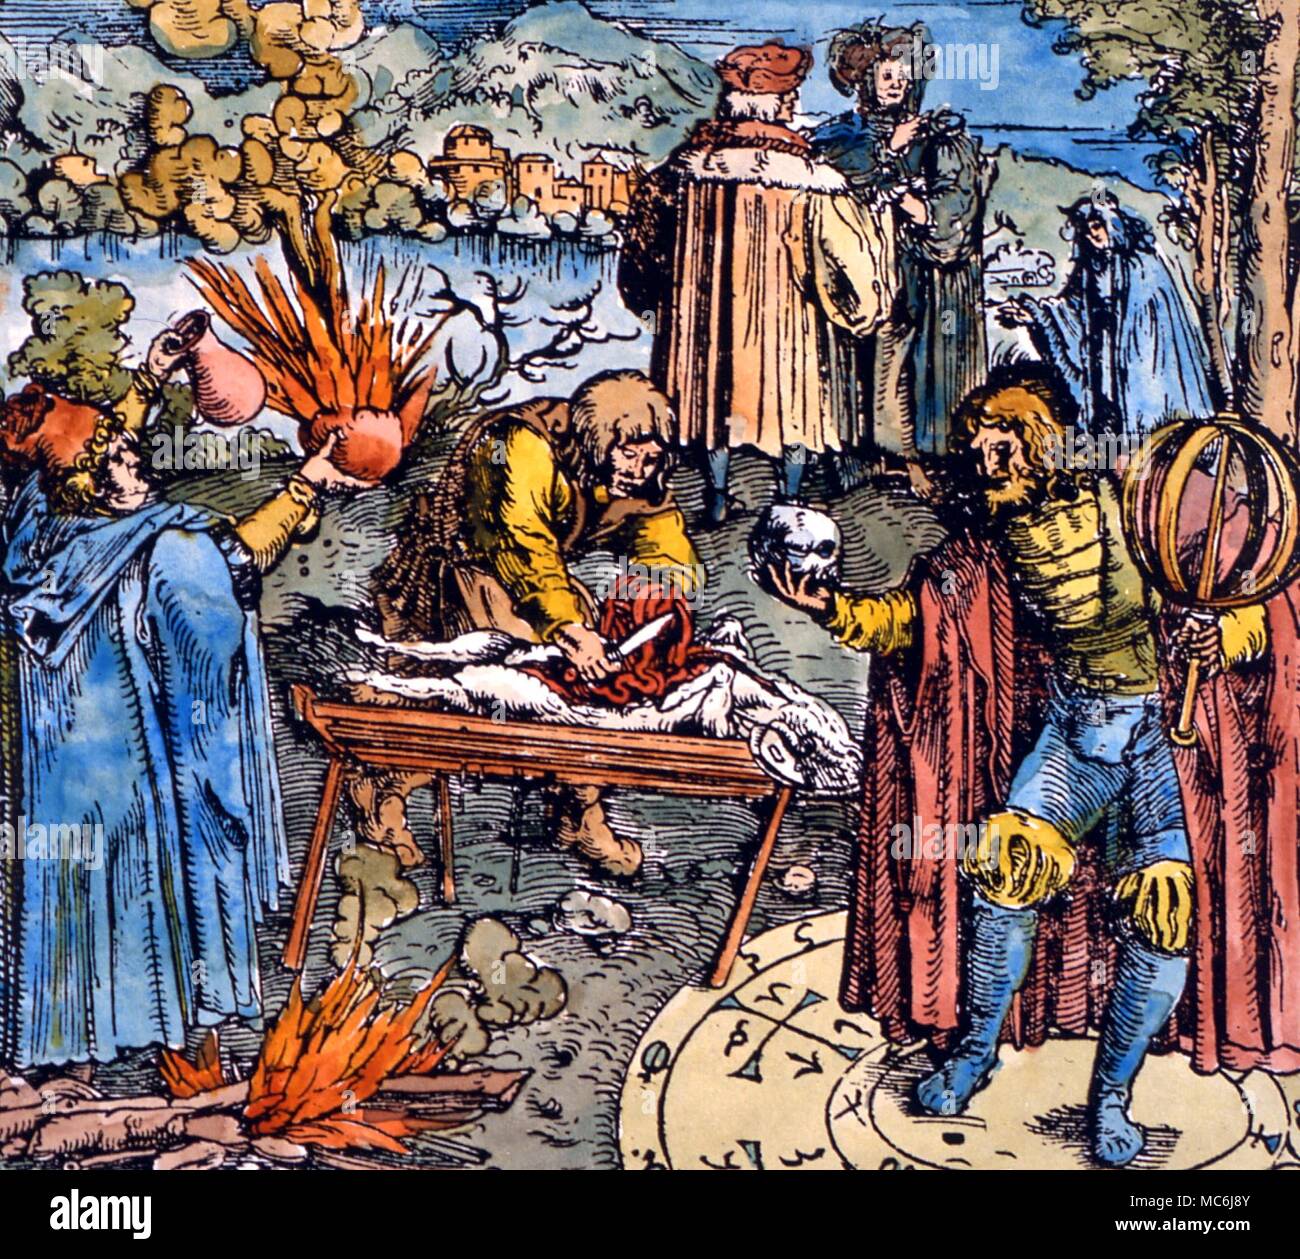 DIVINATION. Magician disembowelling a goat, and another magician raising demons from within a protective circle. Hand-coloured woodcut from Petrach's 'De Remediss Utriusque Fortunae' Stock Photo